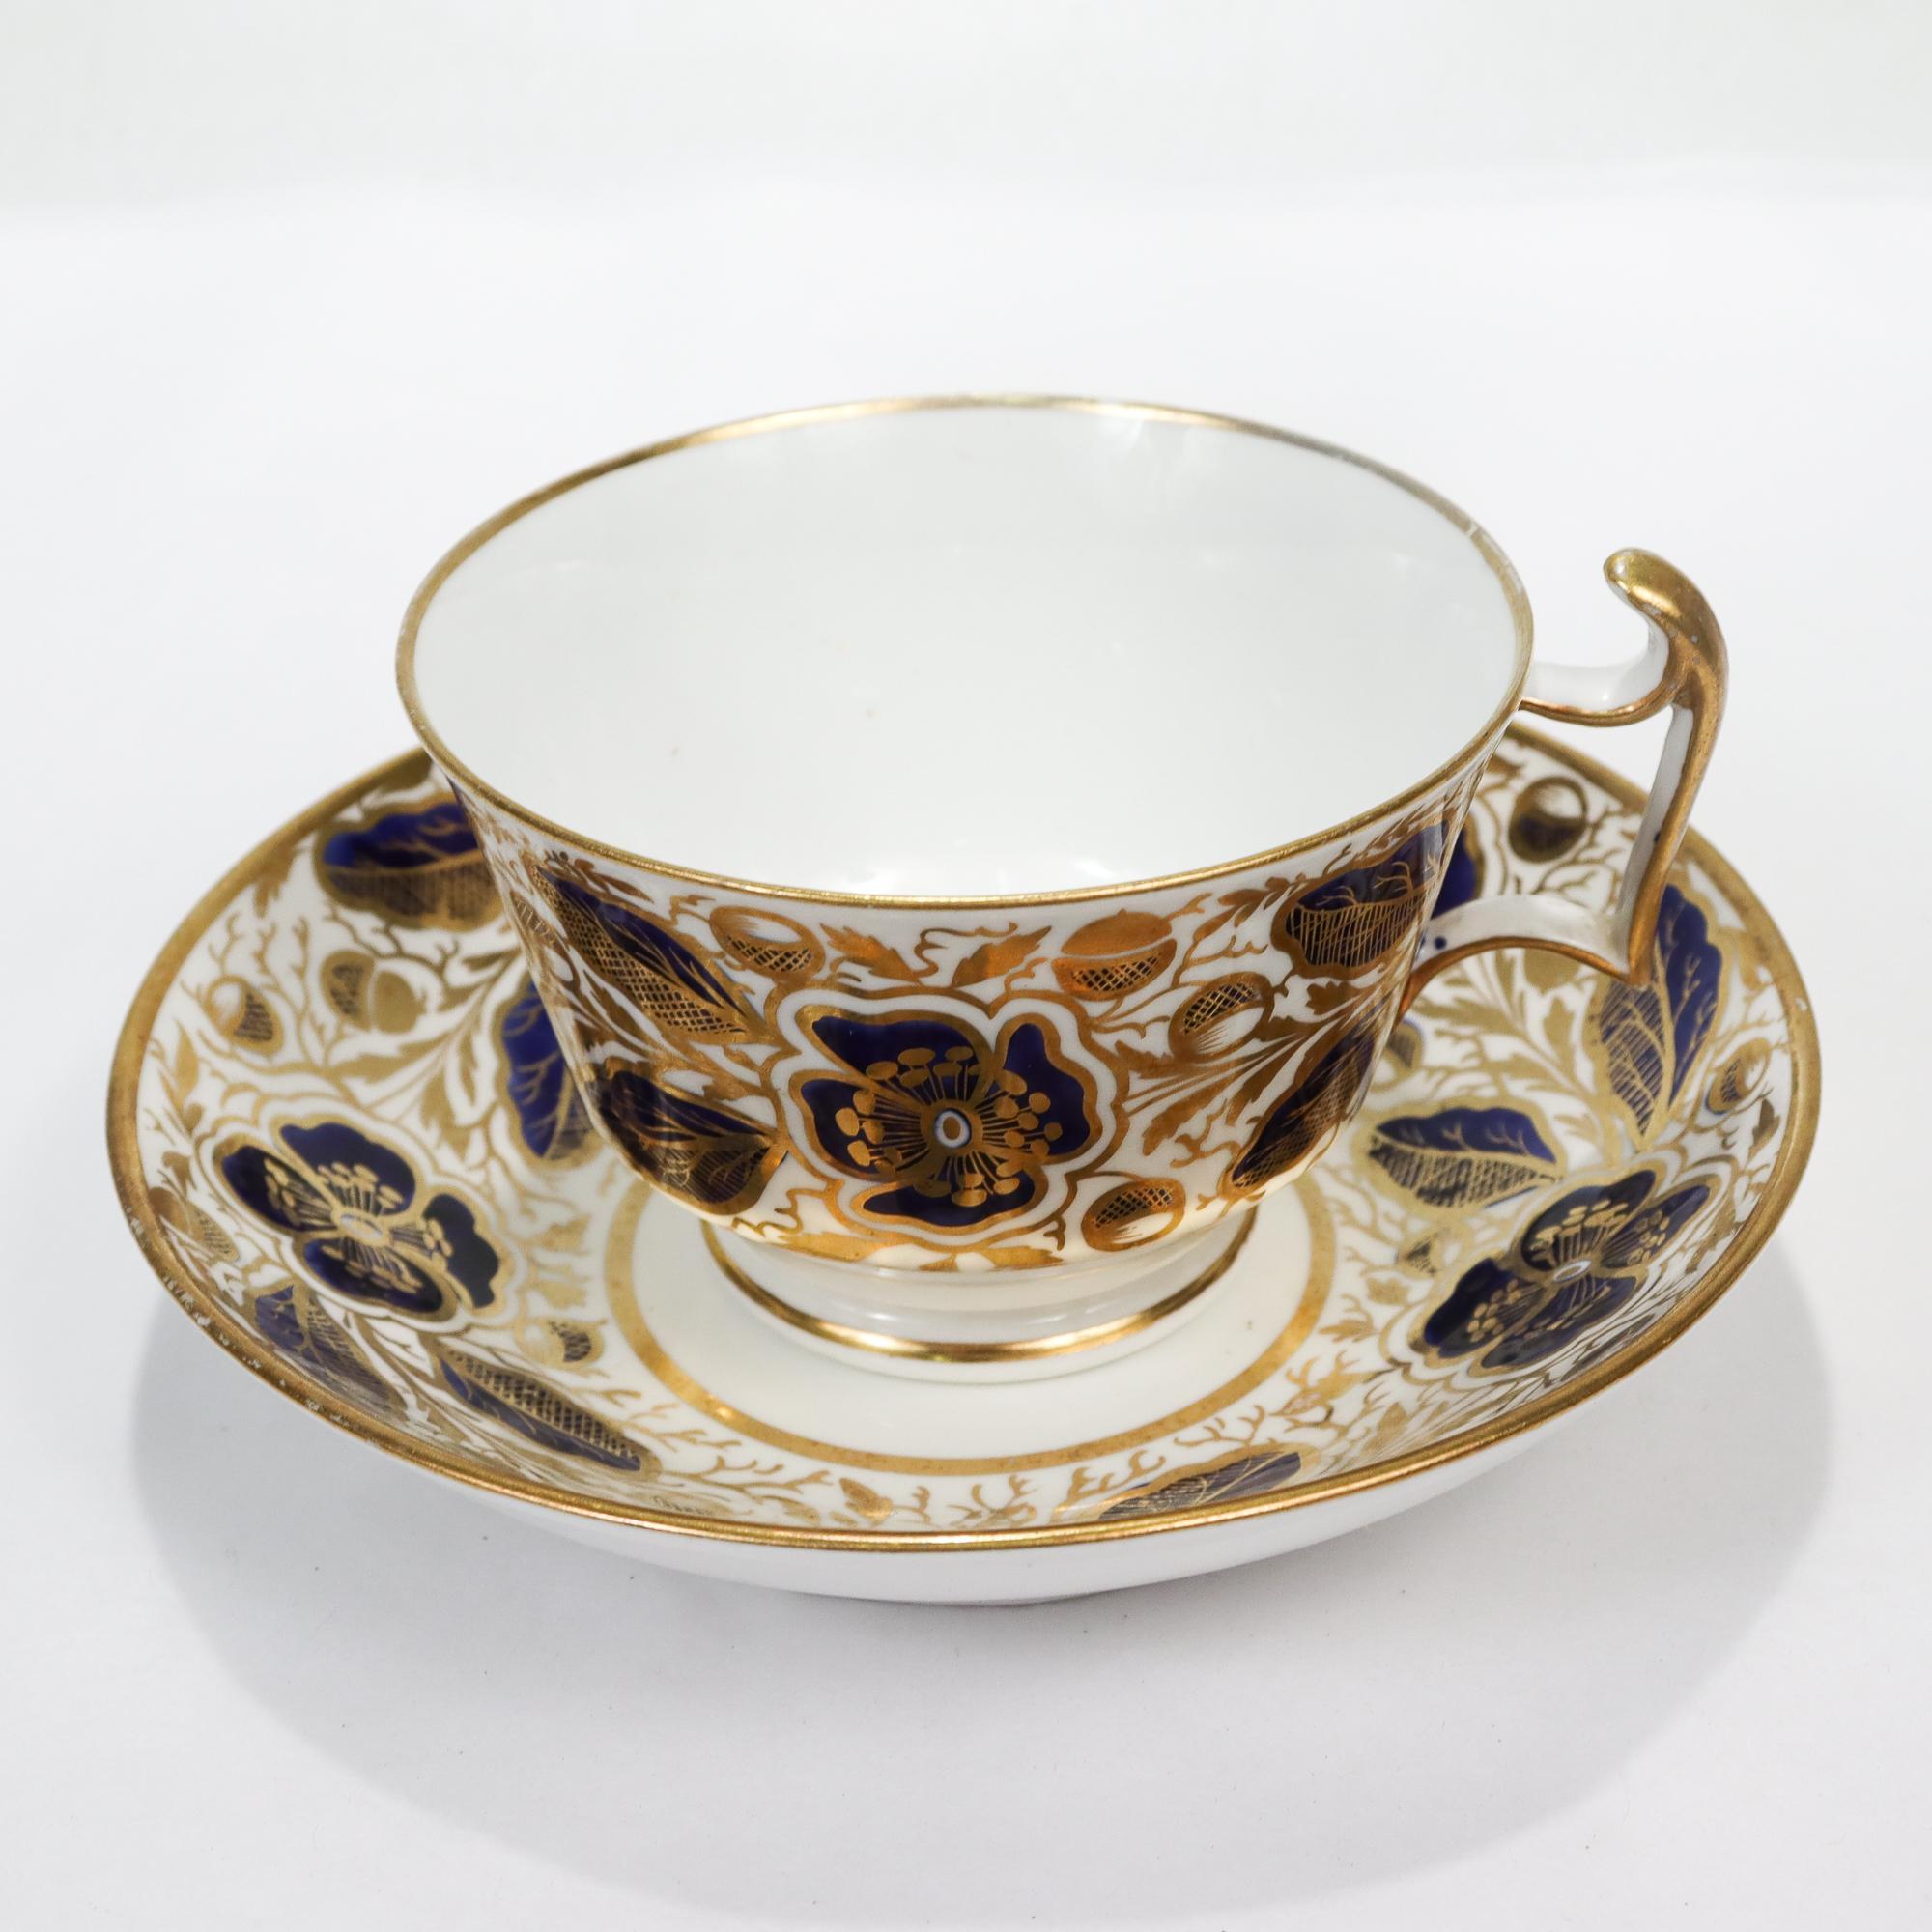 Gilt Antique Early 19th Century Spode Porcelain Pattern Number 2408 Tea Cup & Saucer For Sale